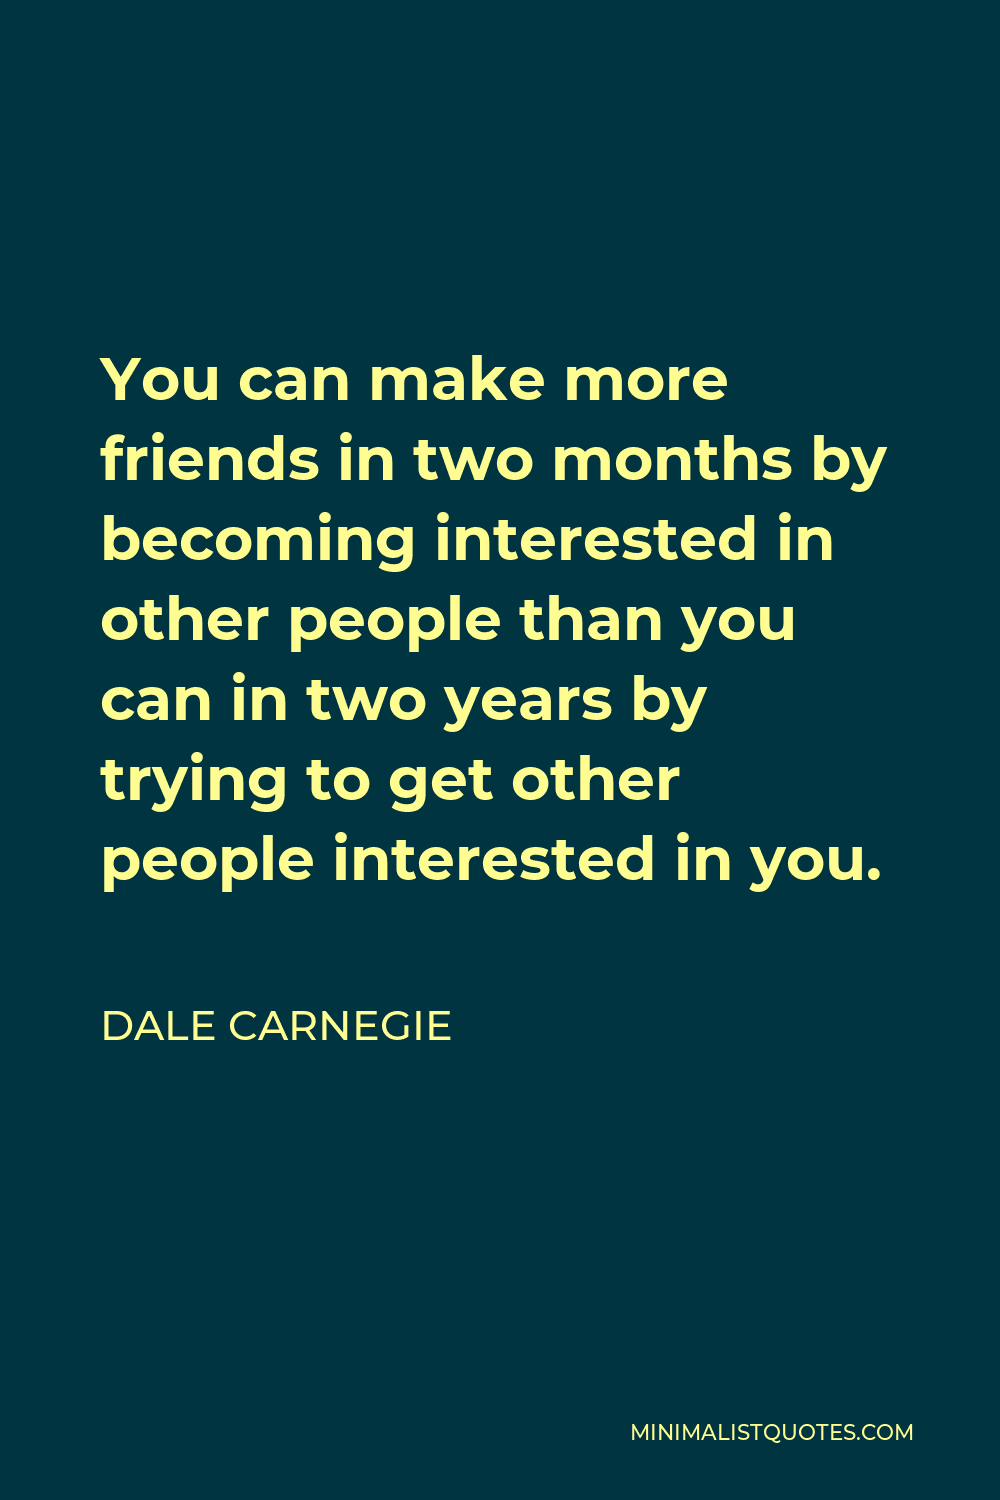 Dale Carnegie Quote - You can make more friends in two months by becoming interested in other people than you can in two years by trying to get other people interested in you.